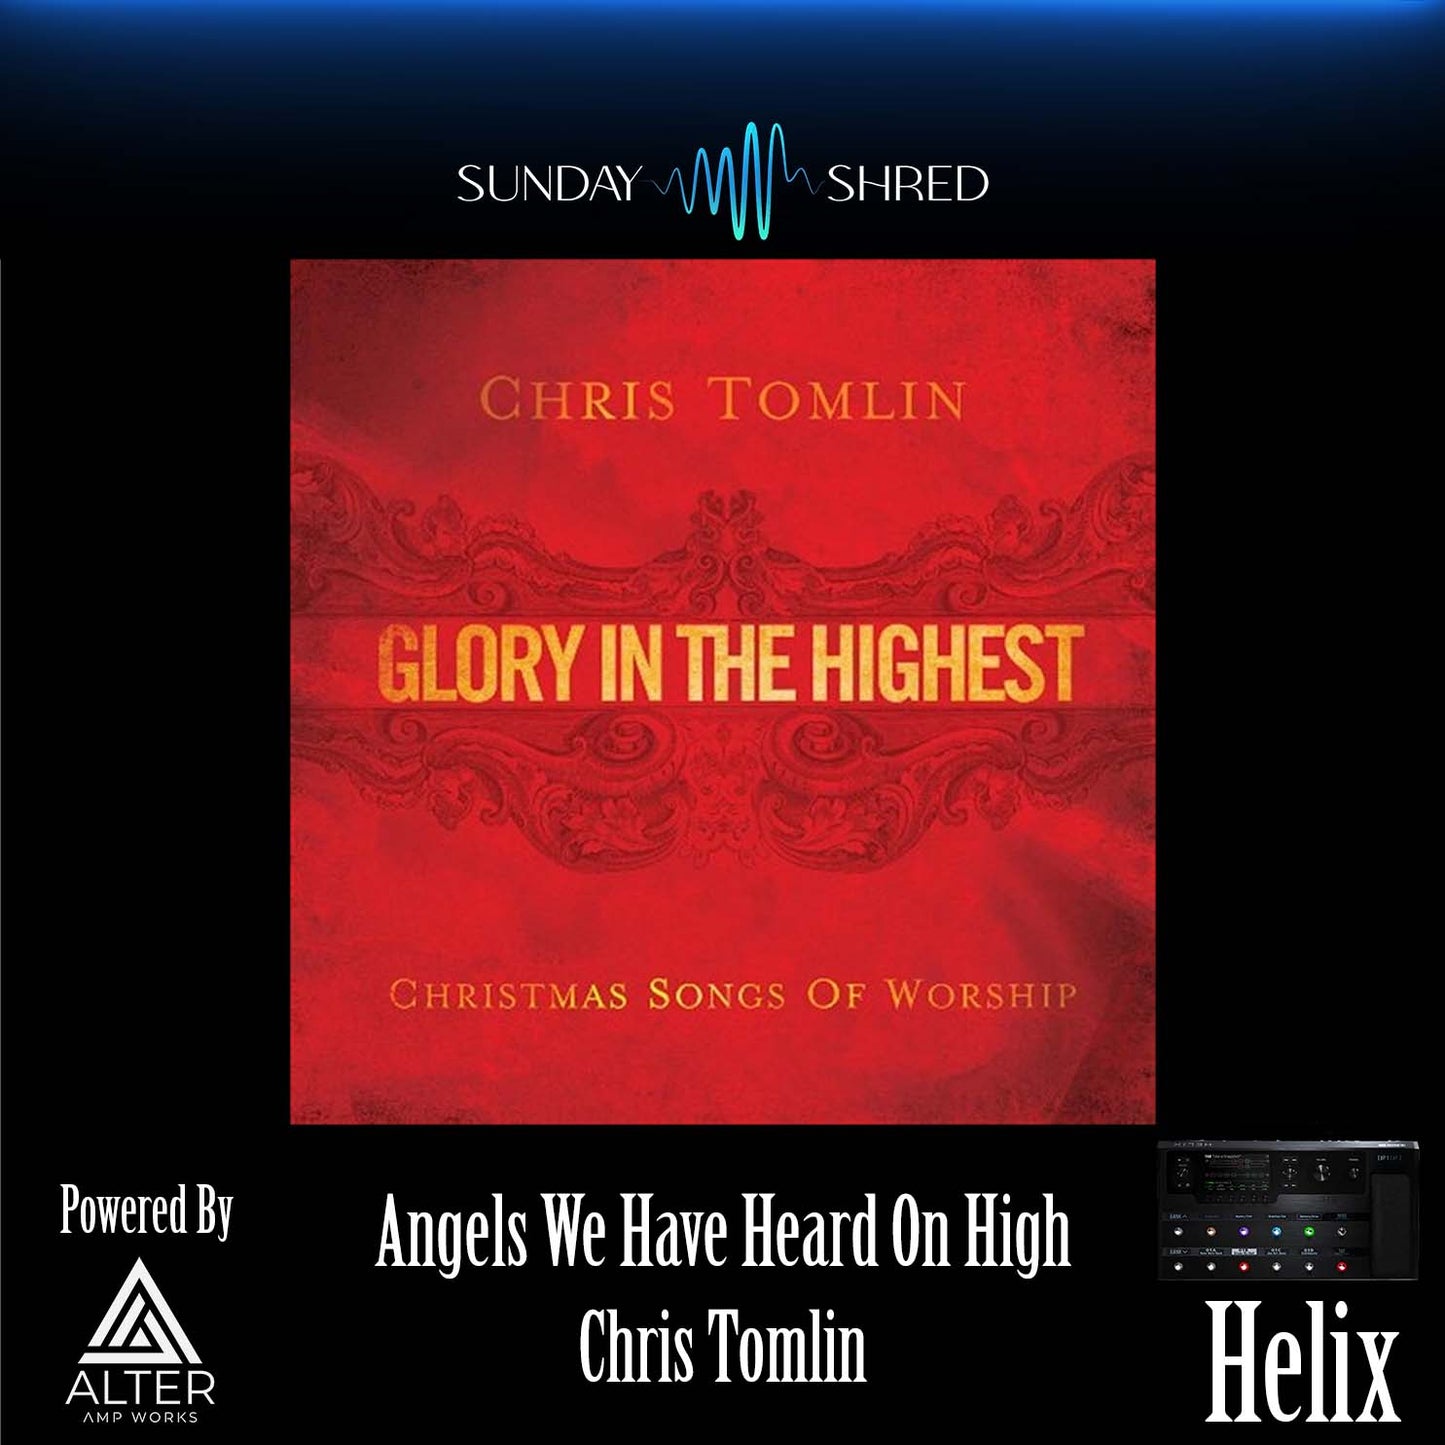 Angels We have Heard On High - Chris Tomlin - Helix Patch